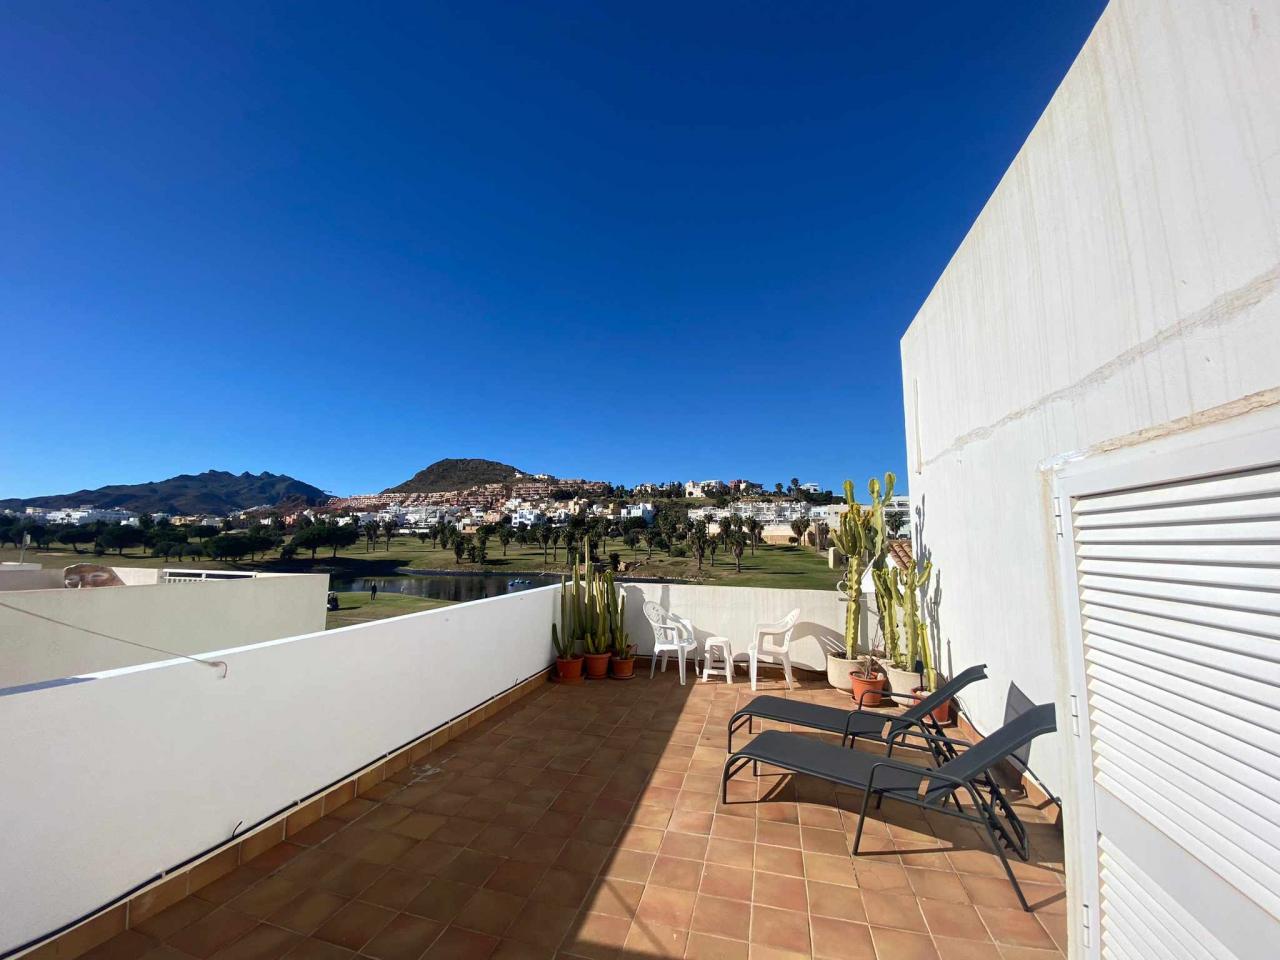 Spectacular apartment, cosy for a happy rest: Apartment for Rent in Mojácar, Almería